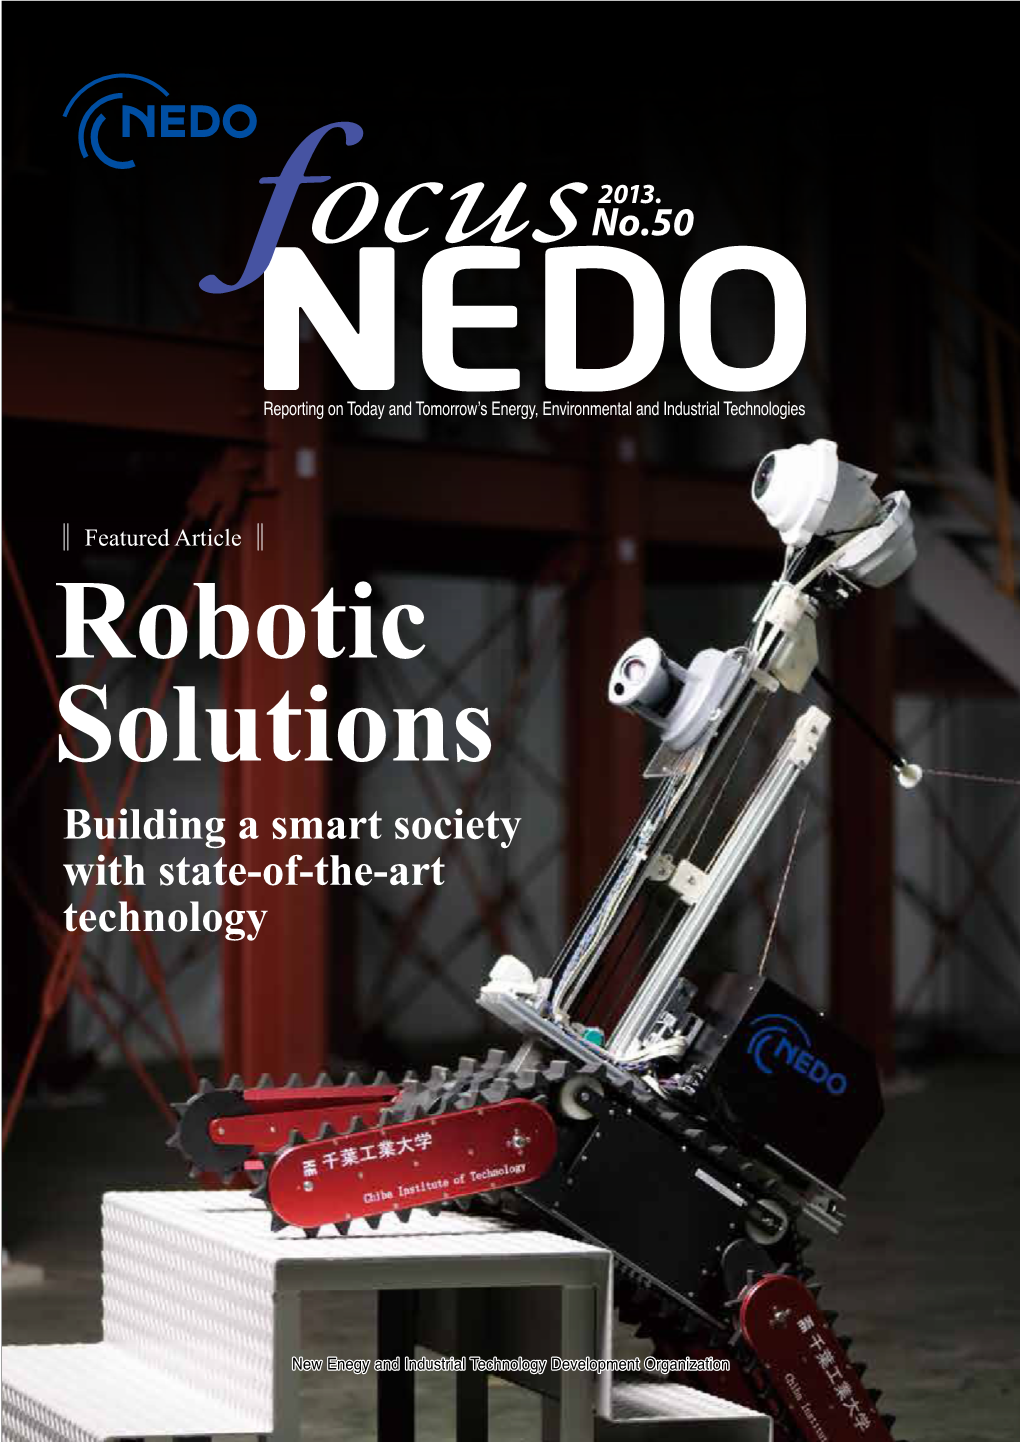 Robotic Solutions Fields of Lifestyle and Social Welfare, As Well As Public Services and Disaster Preparedness